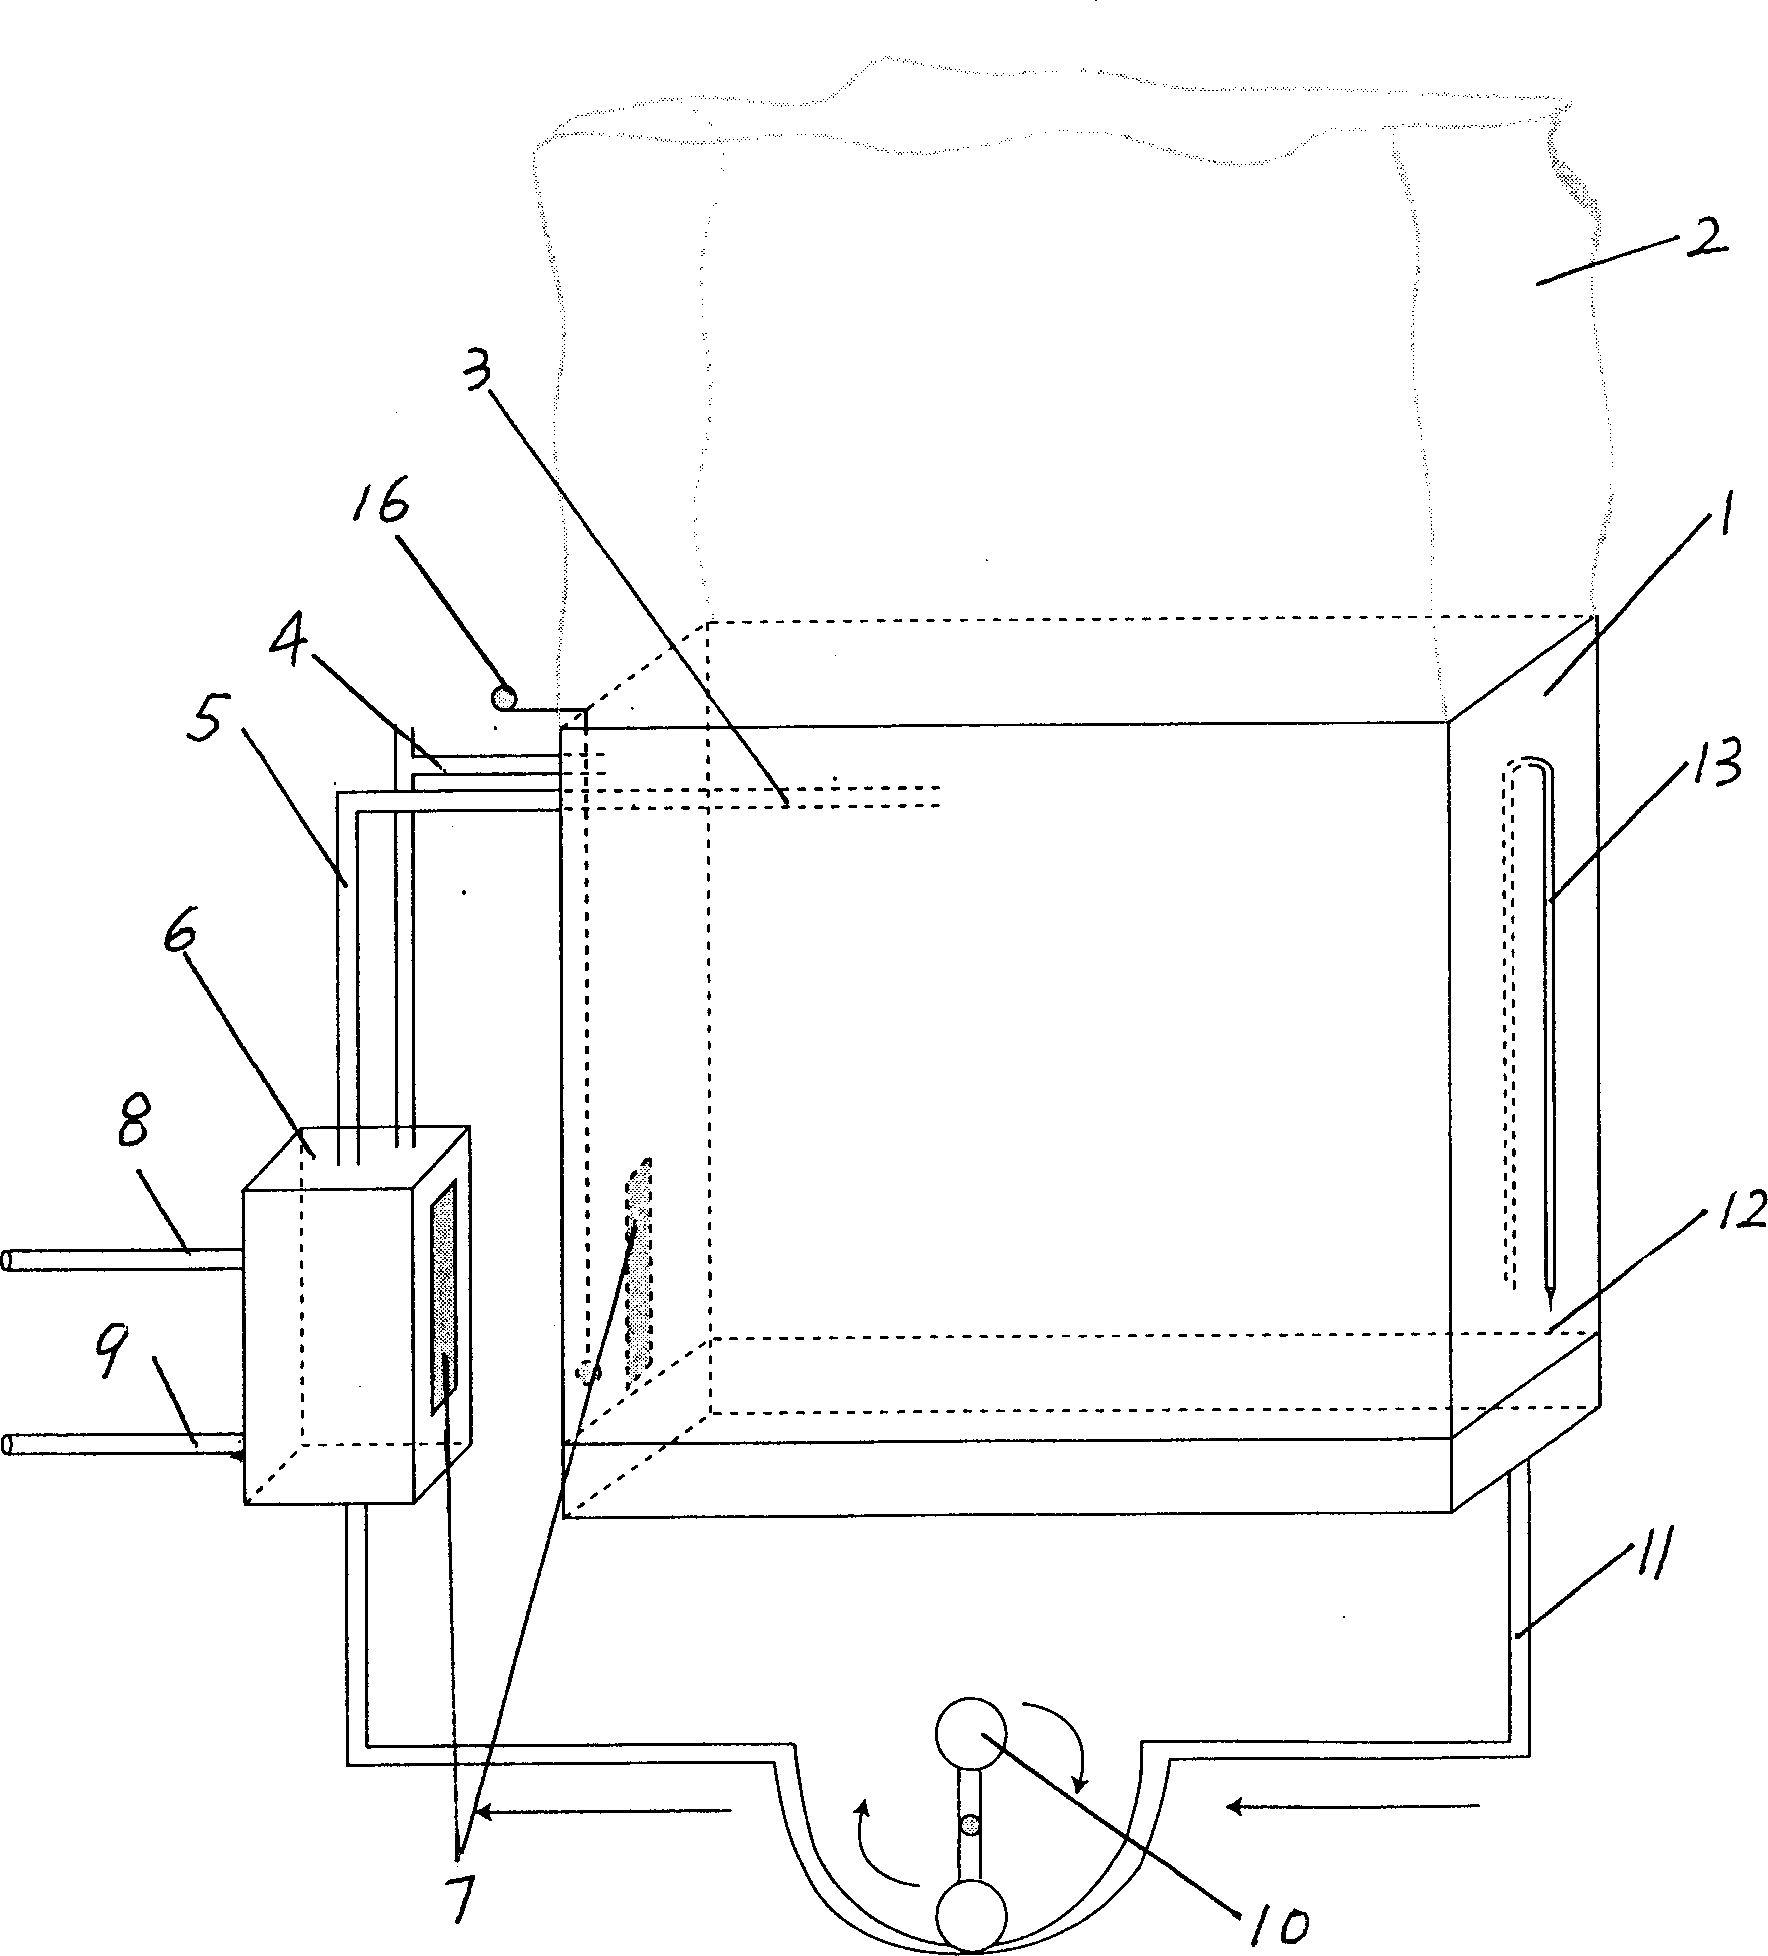 Continuously perfused heart keeping device